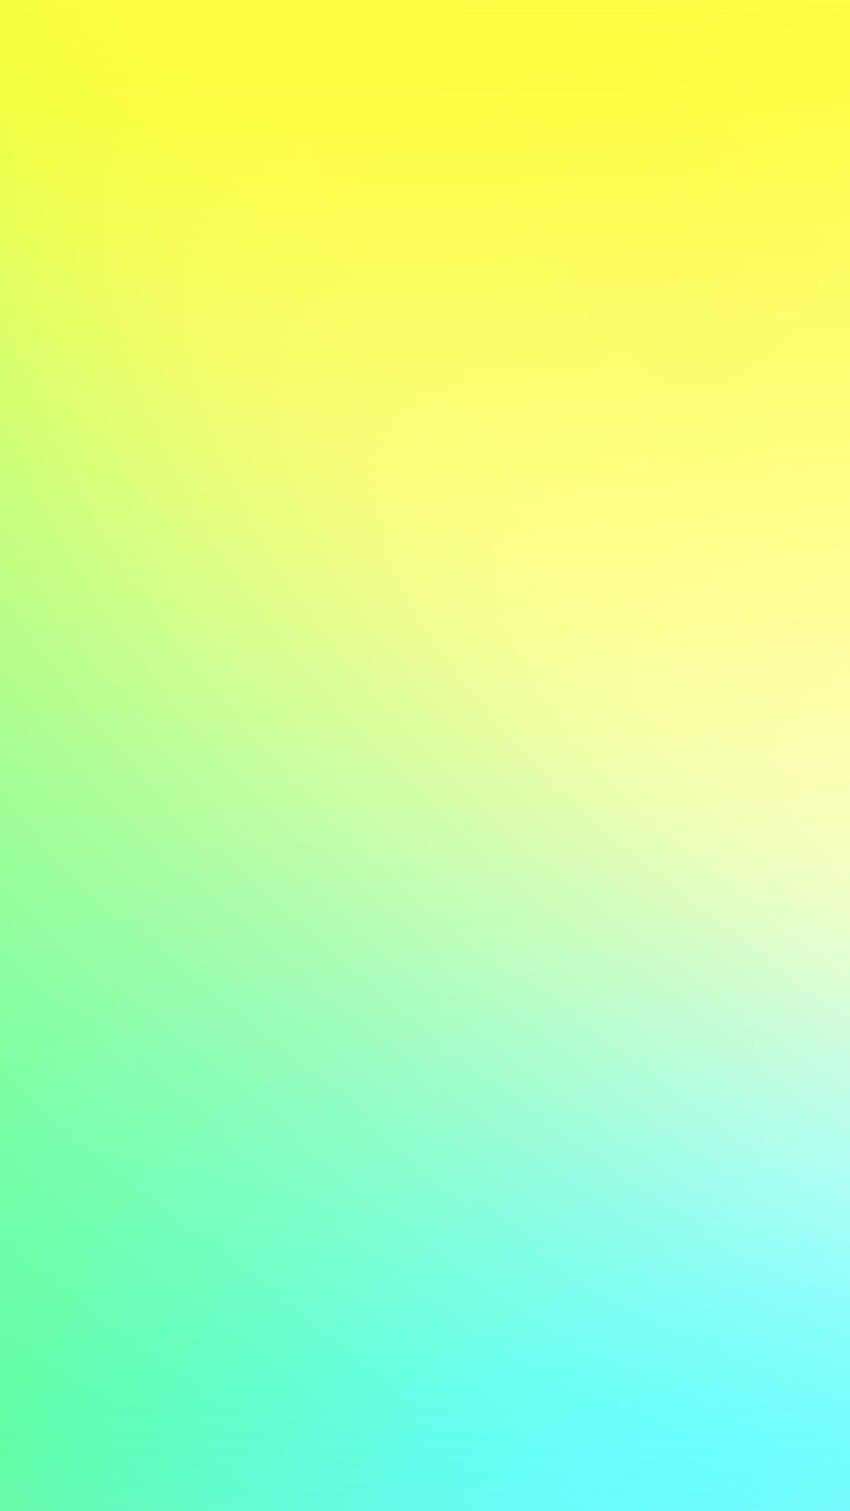 Aesthetic Yellow Iphone, green and yellow aesthetic HD phone wallpaper